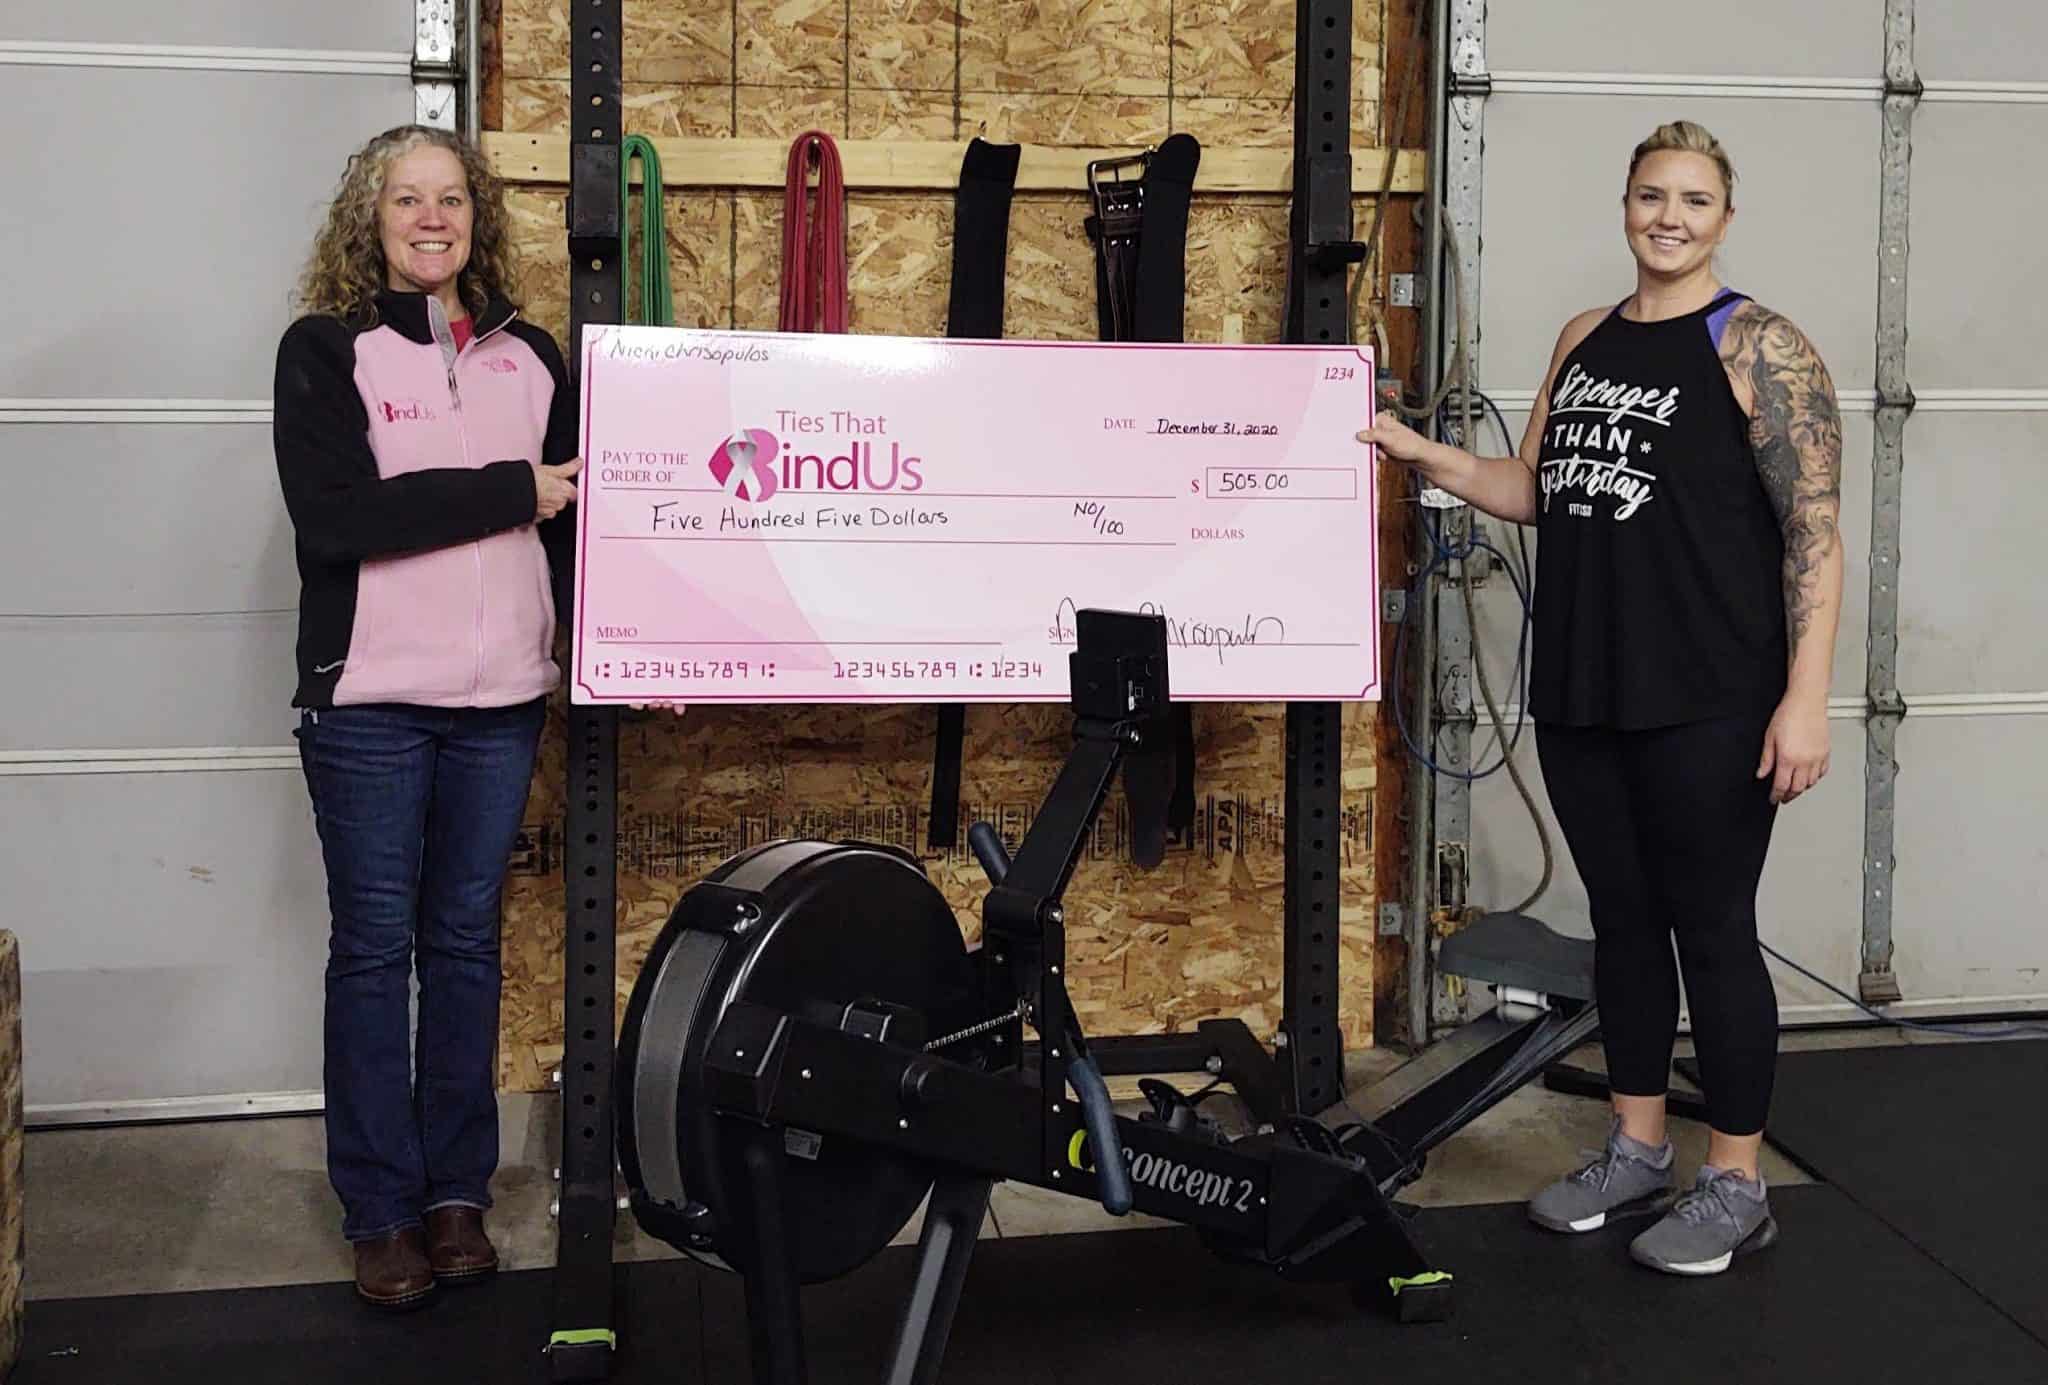 North 4th Strength’s holiday row challenge raises money for local charities, organizations